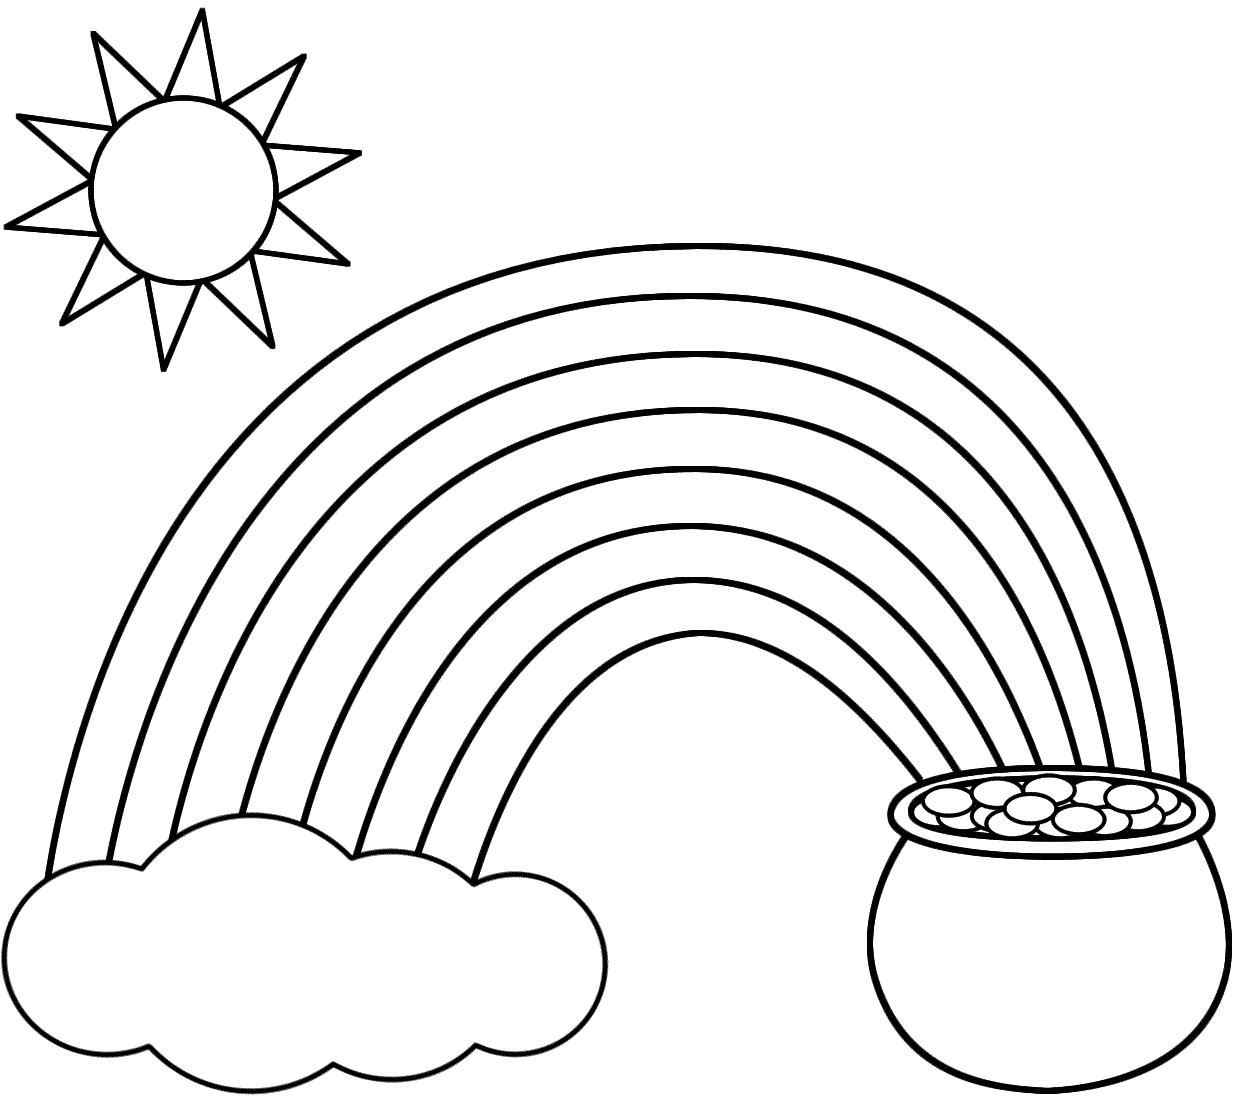 Rainbow, Pot of Gold, Sun, and Cloud - Coloring Pages